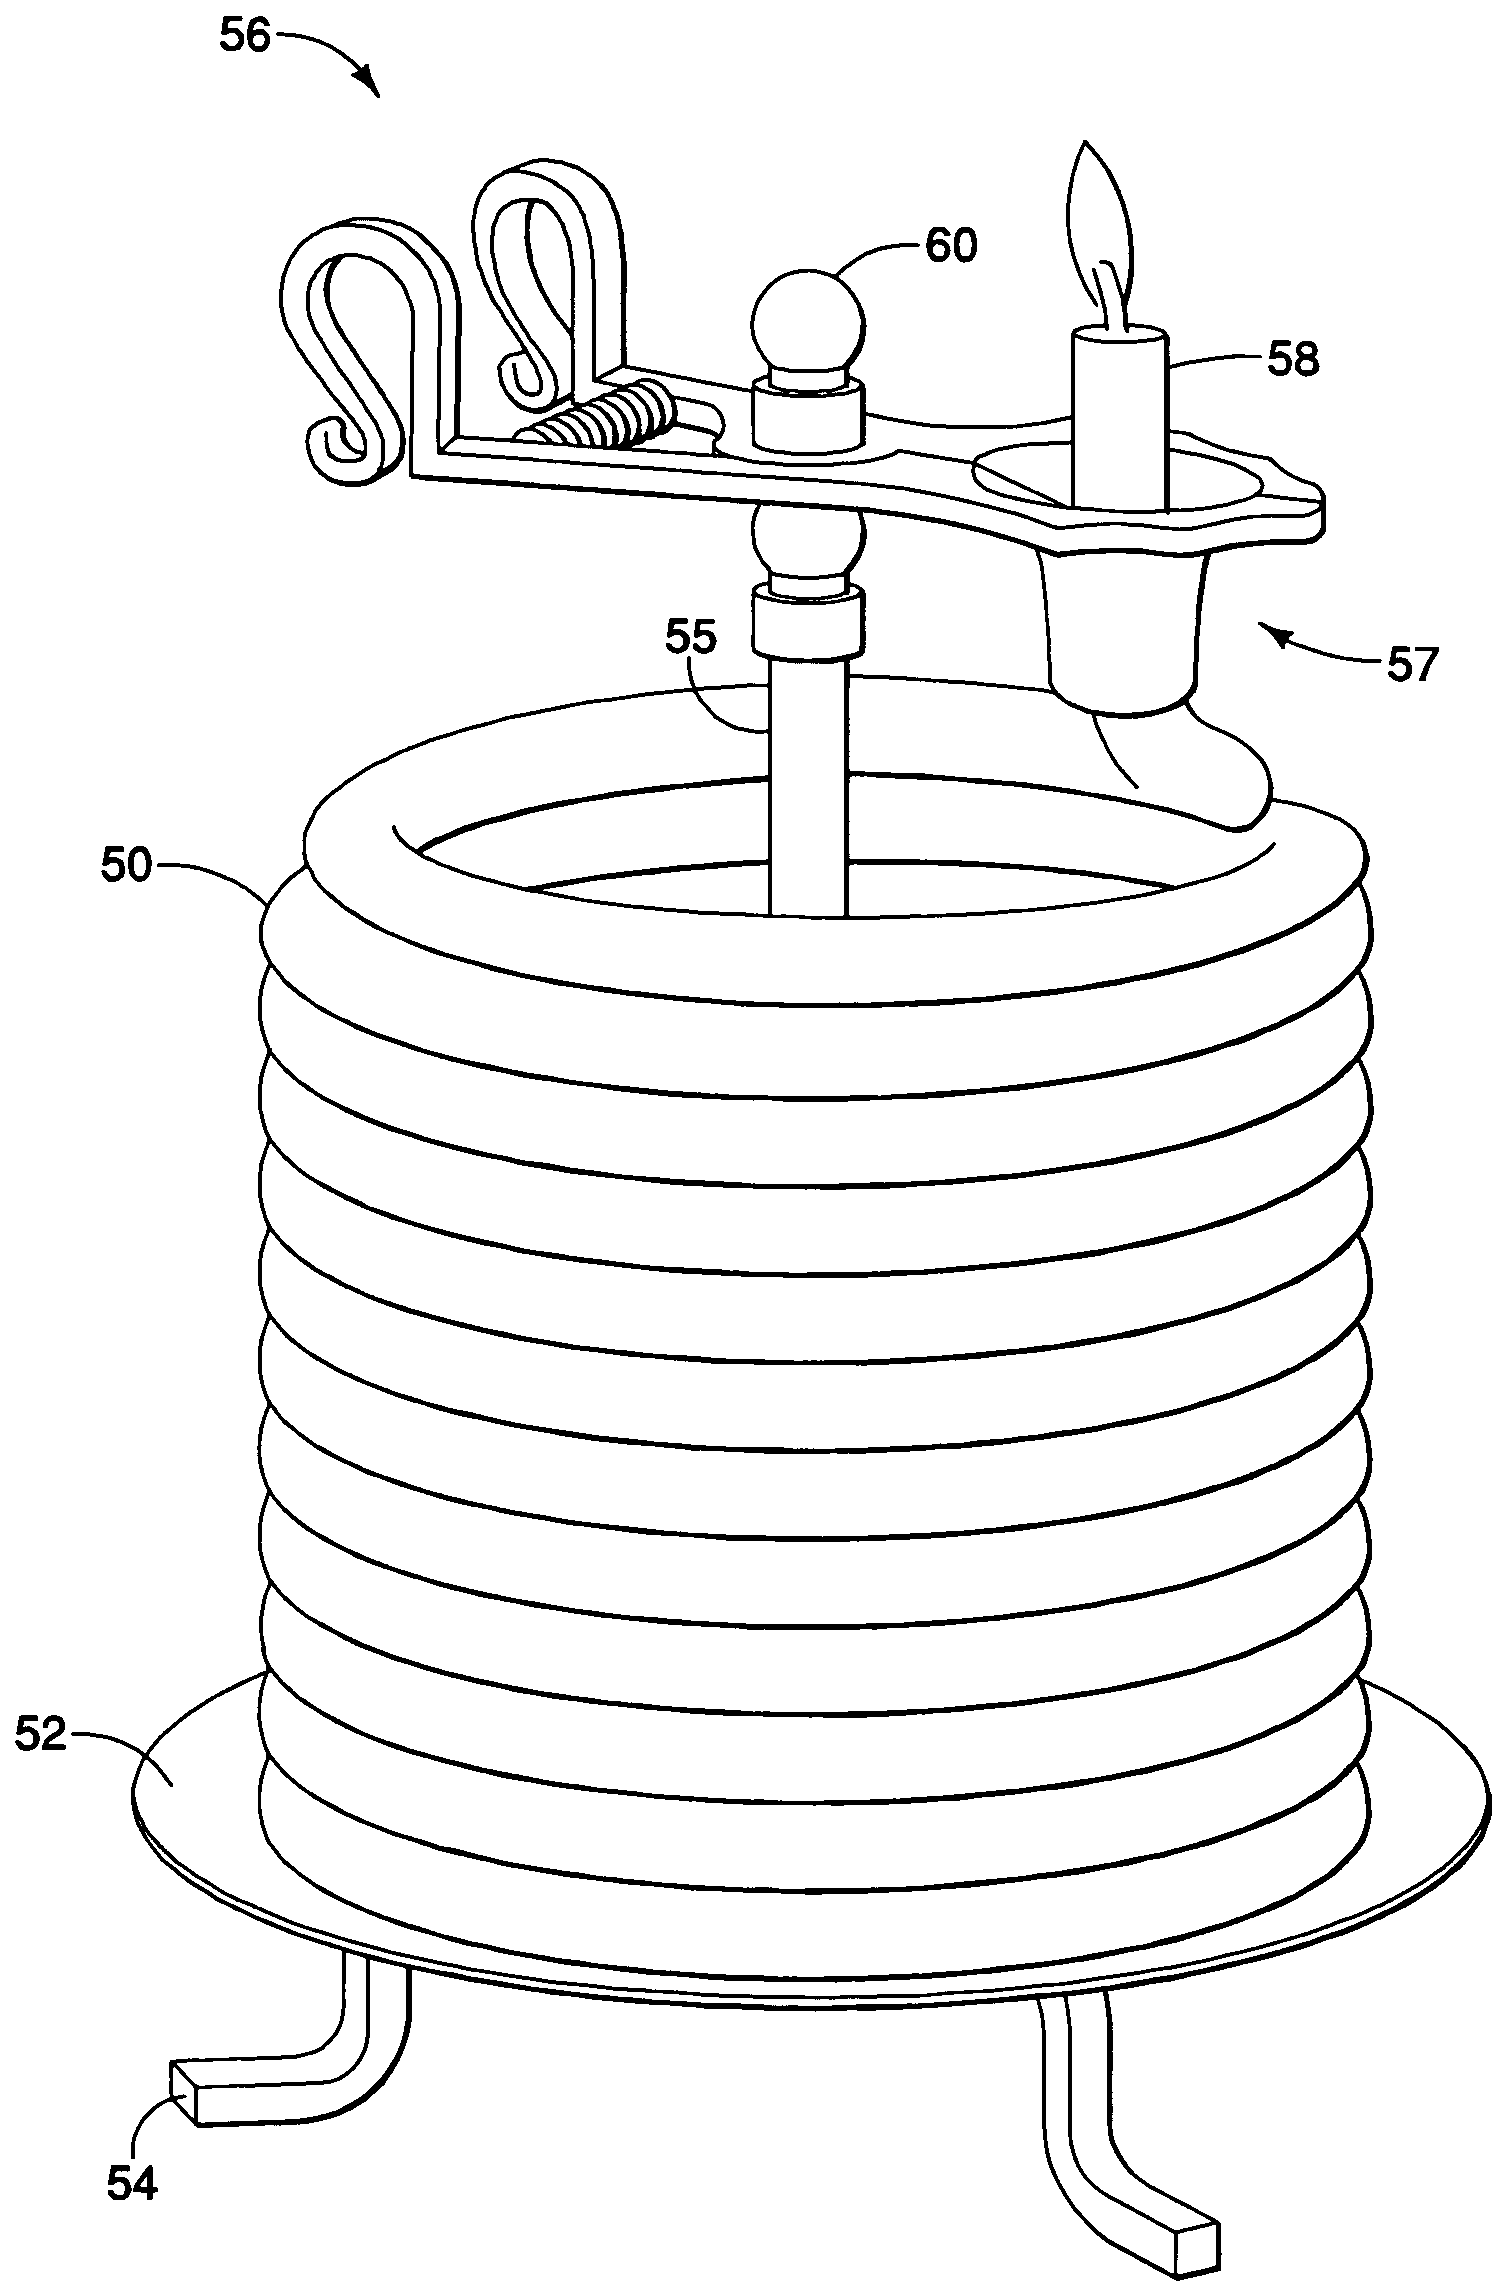 Candle holder and flame extinguisher device